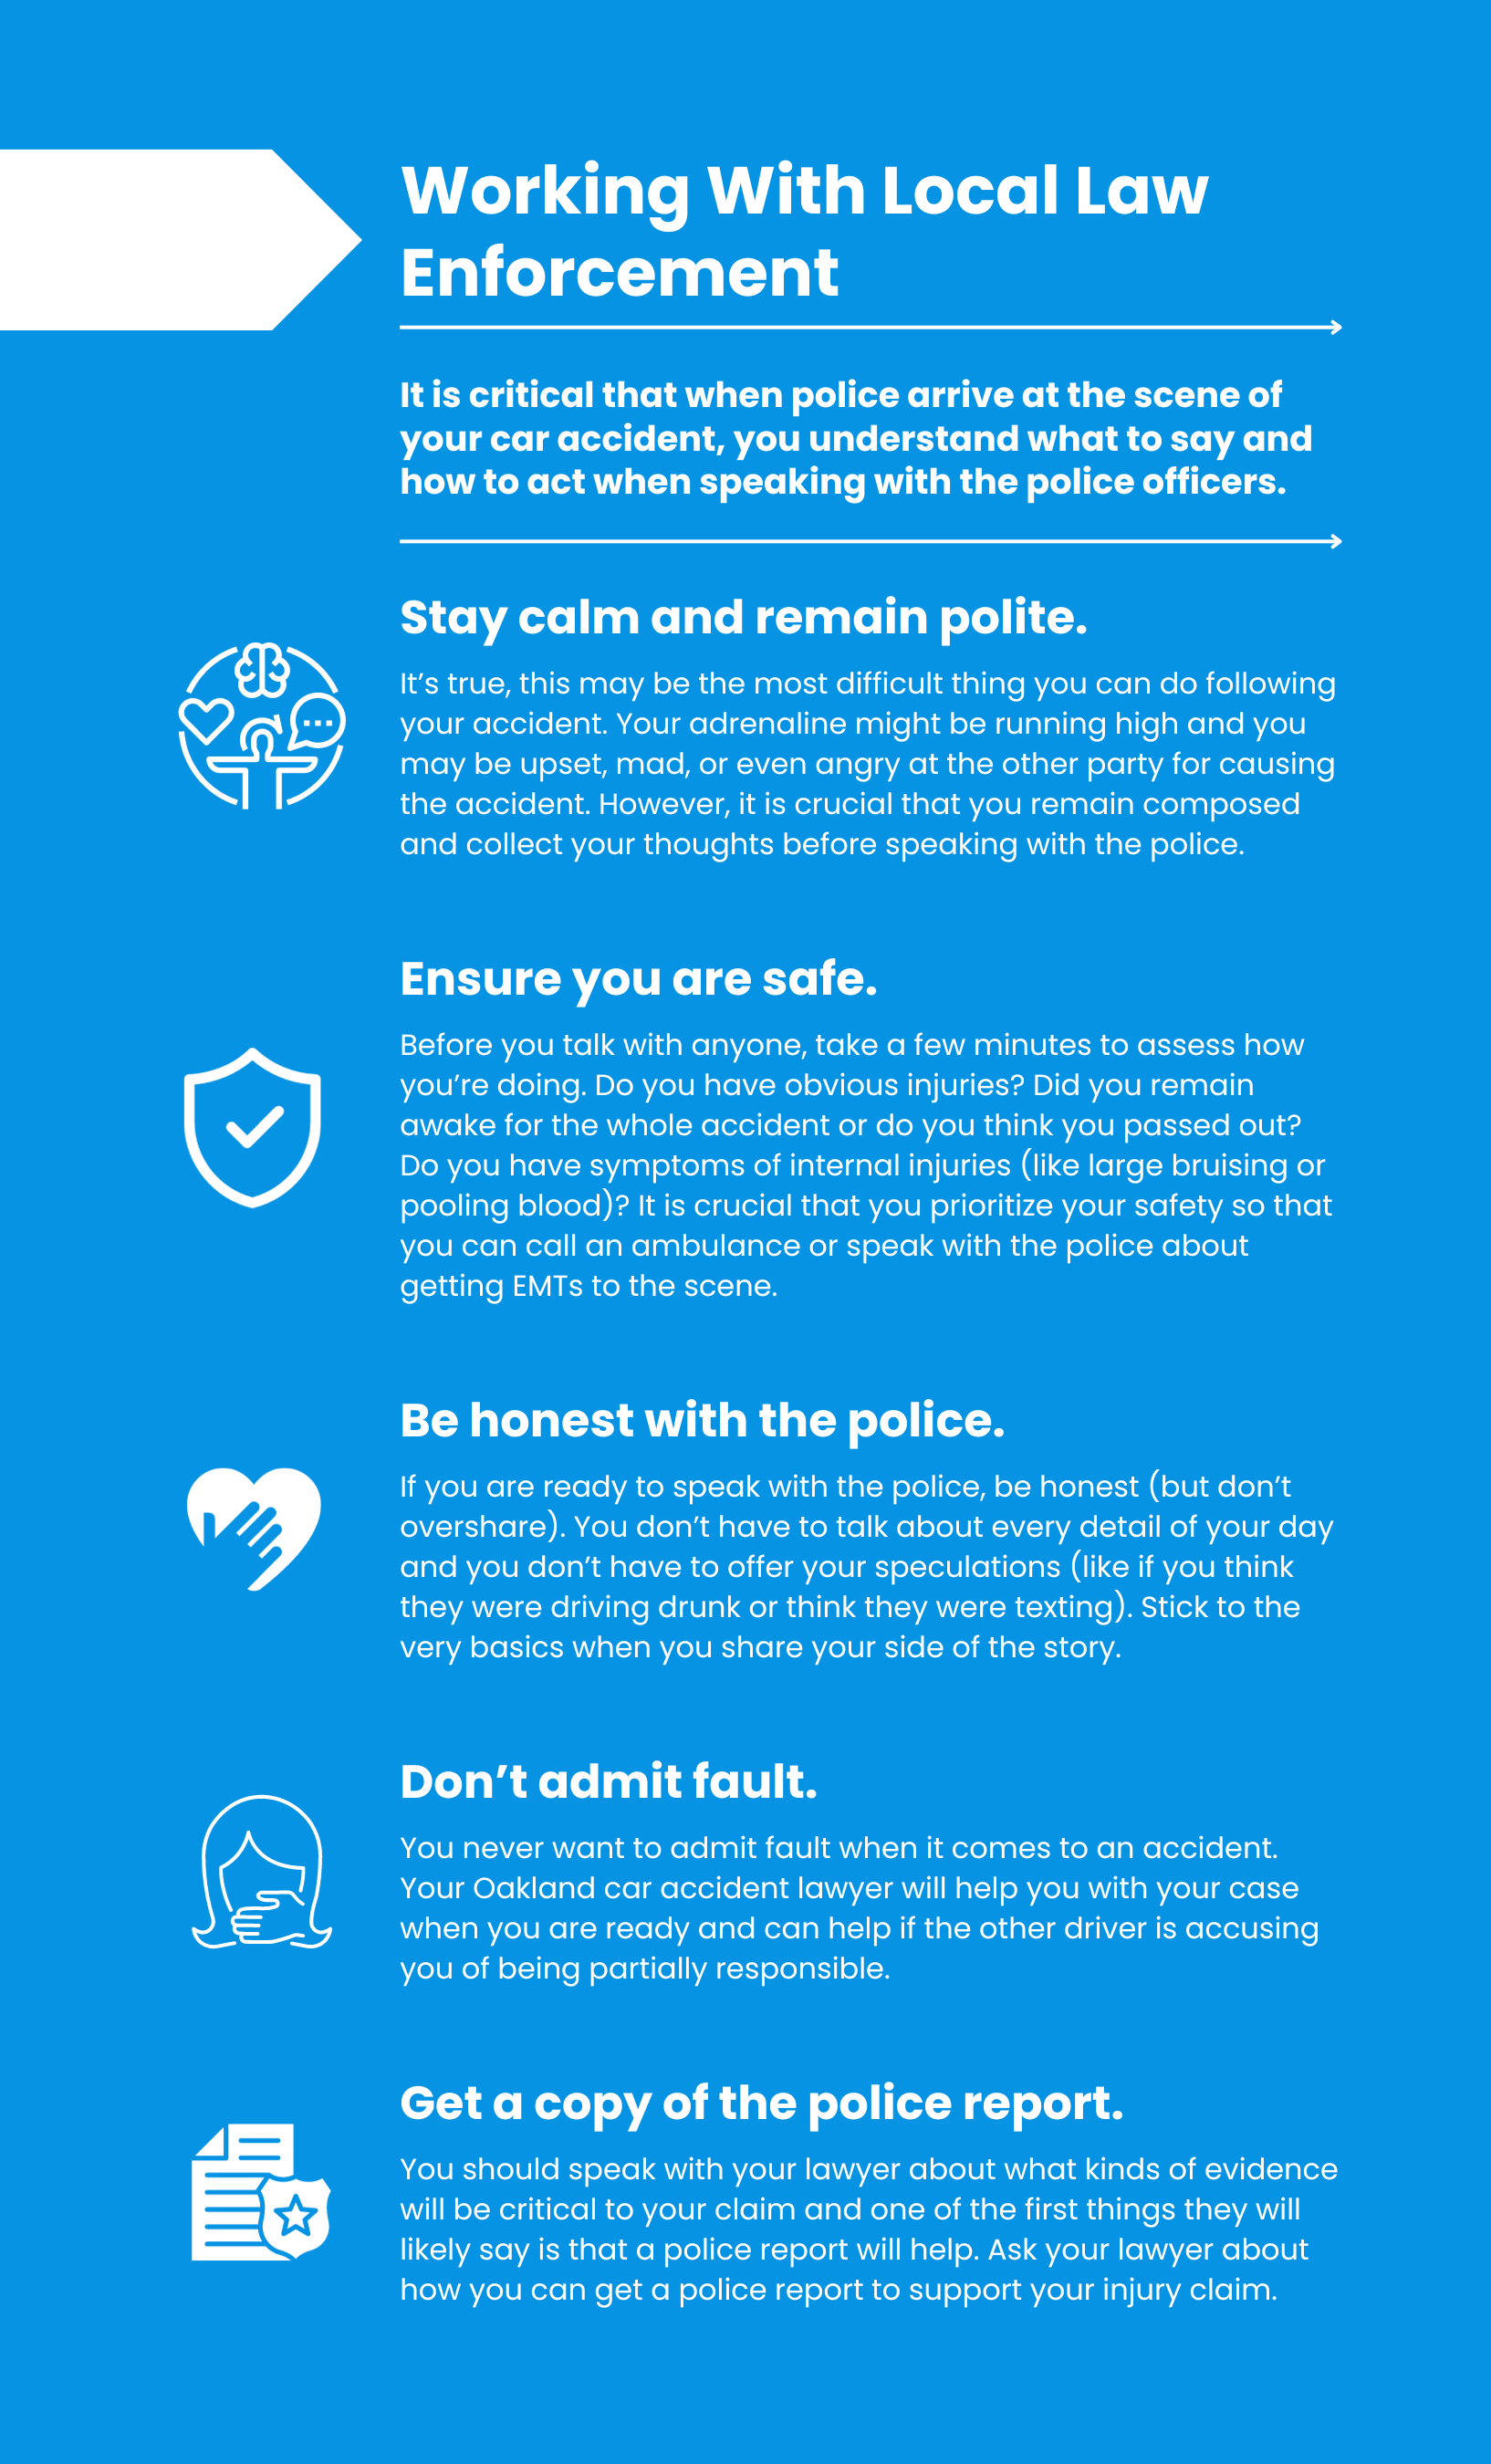 Working With Local Law Enforcement Infographic